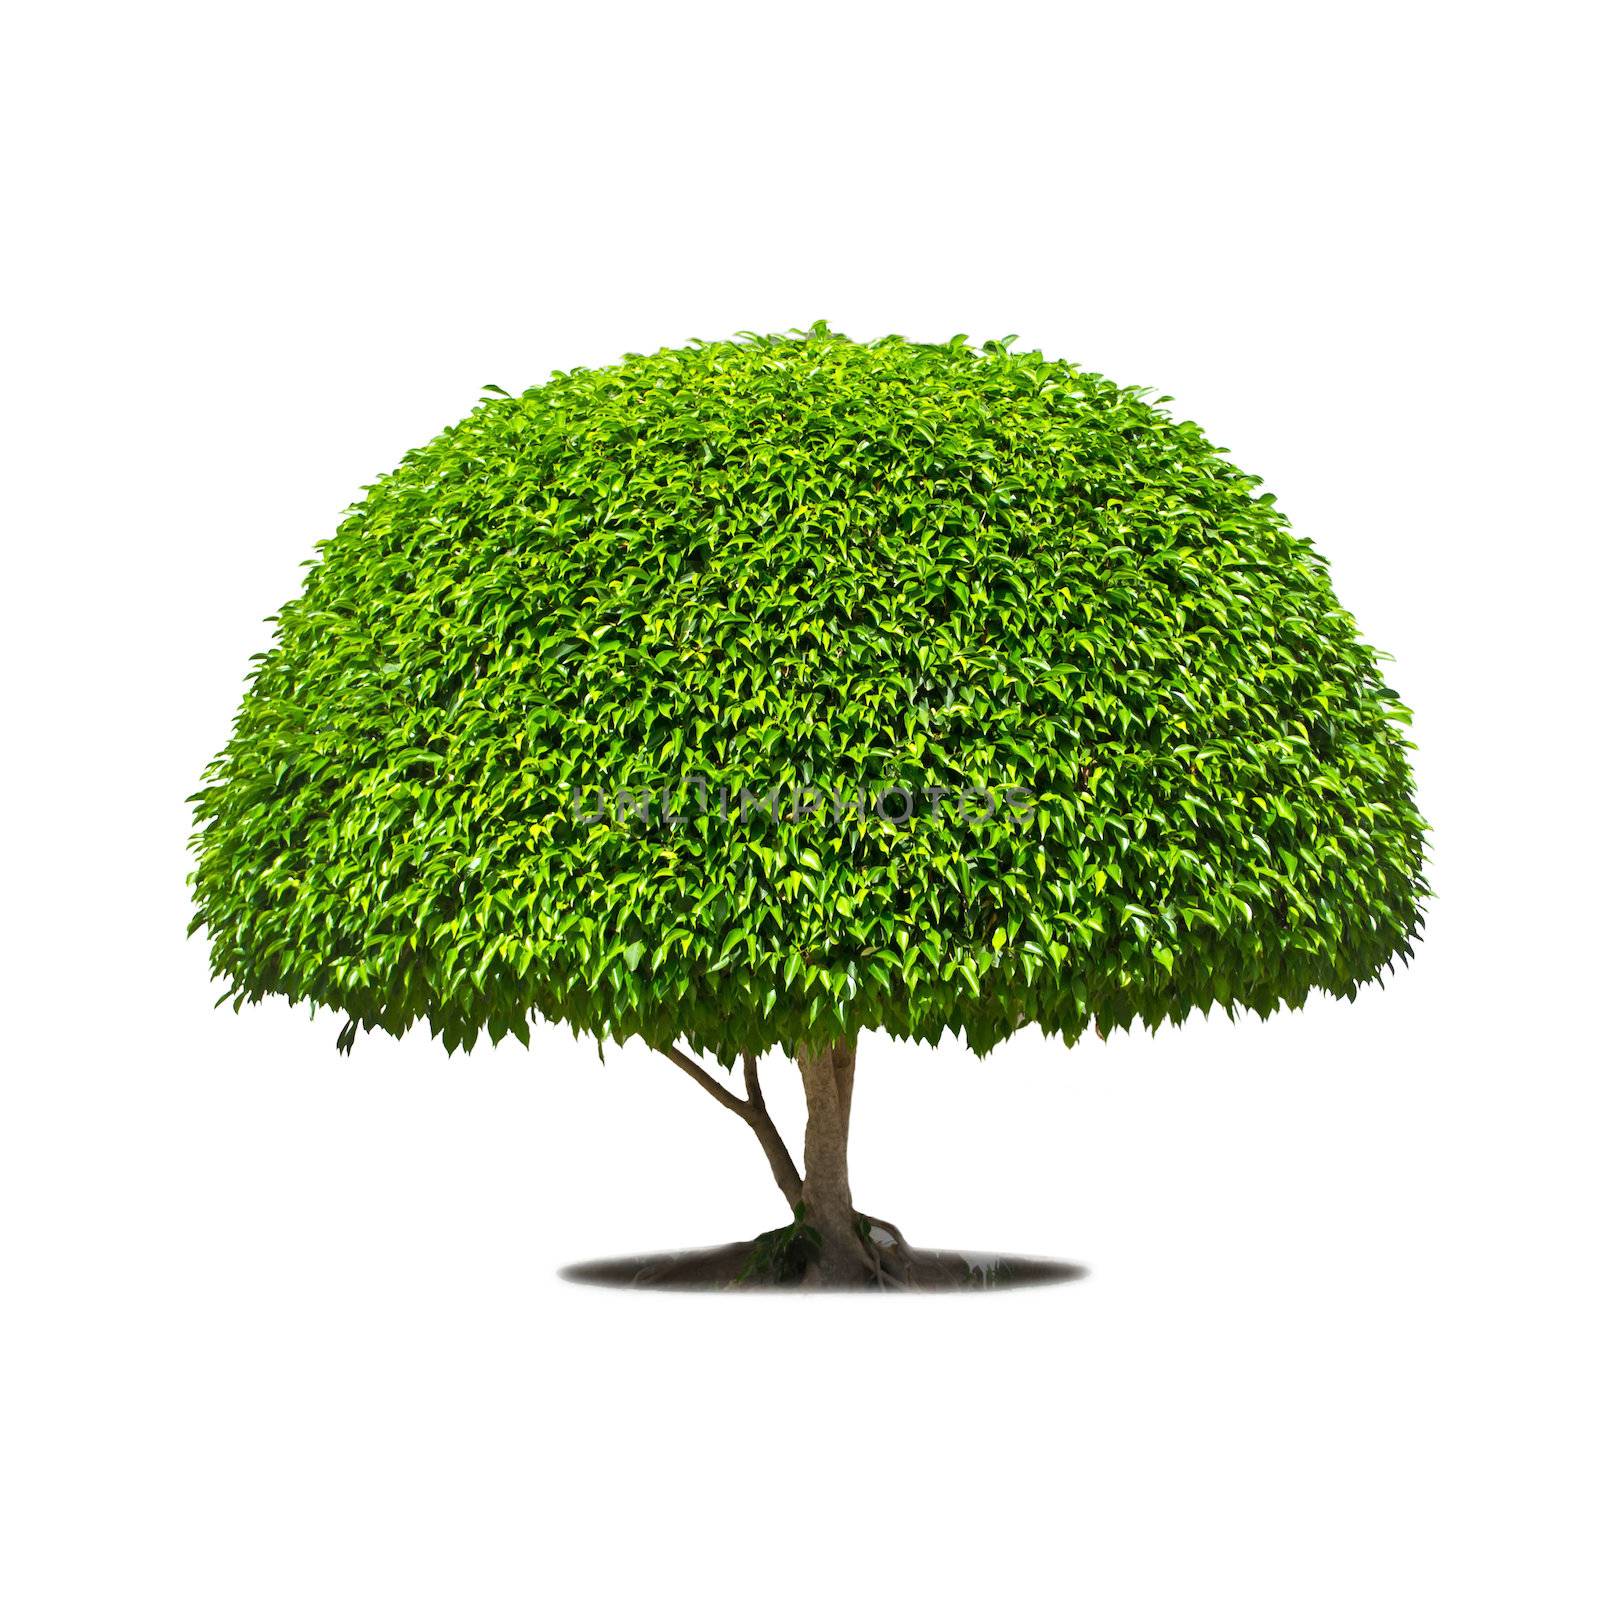 Tree isolate on a white background 